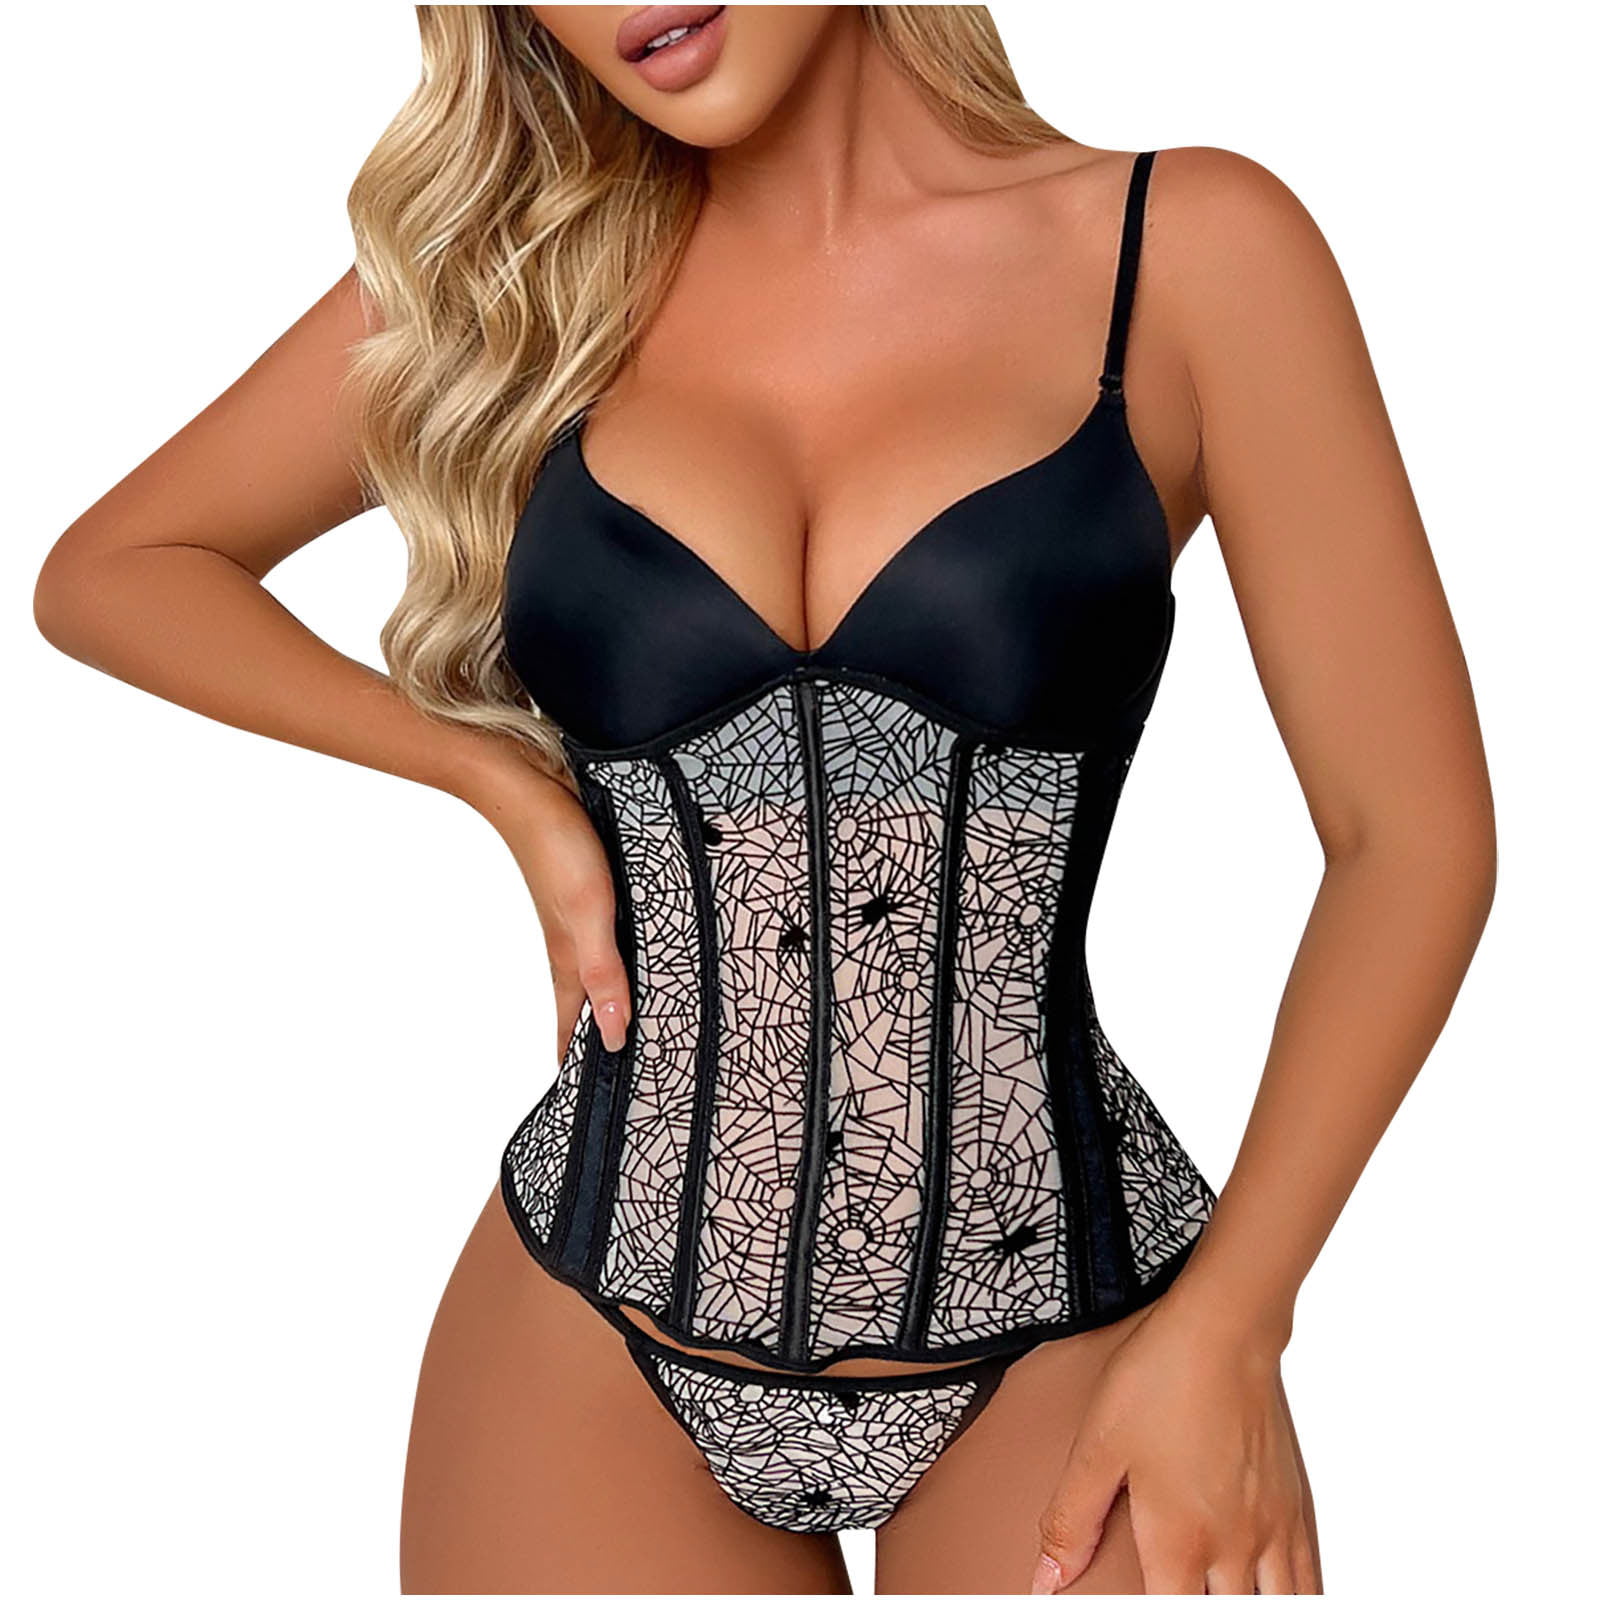 Womens Set Waistband Shaping Corset Women's Suit Backless Lace Up Print Stitching Corset Plus Size Black Lace Lingerie For Women Christmas Lingerie for Women Sexy - Walmart.com